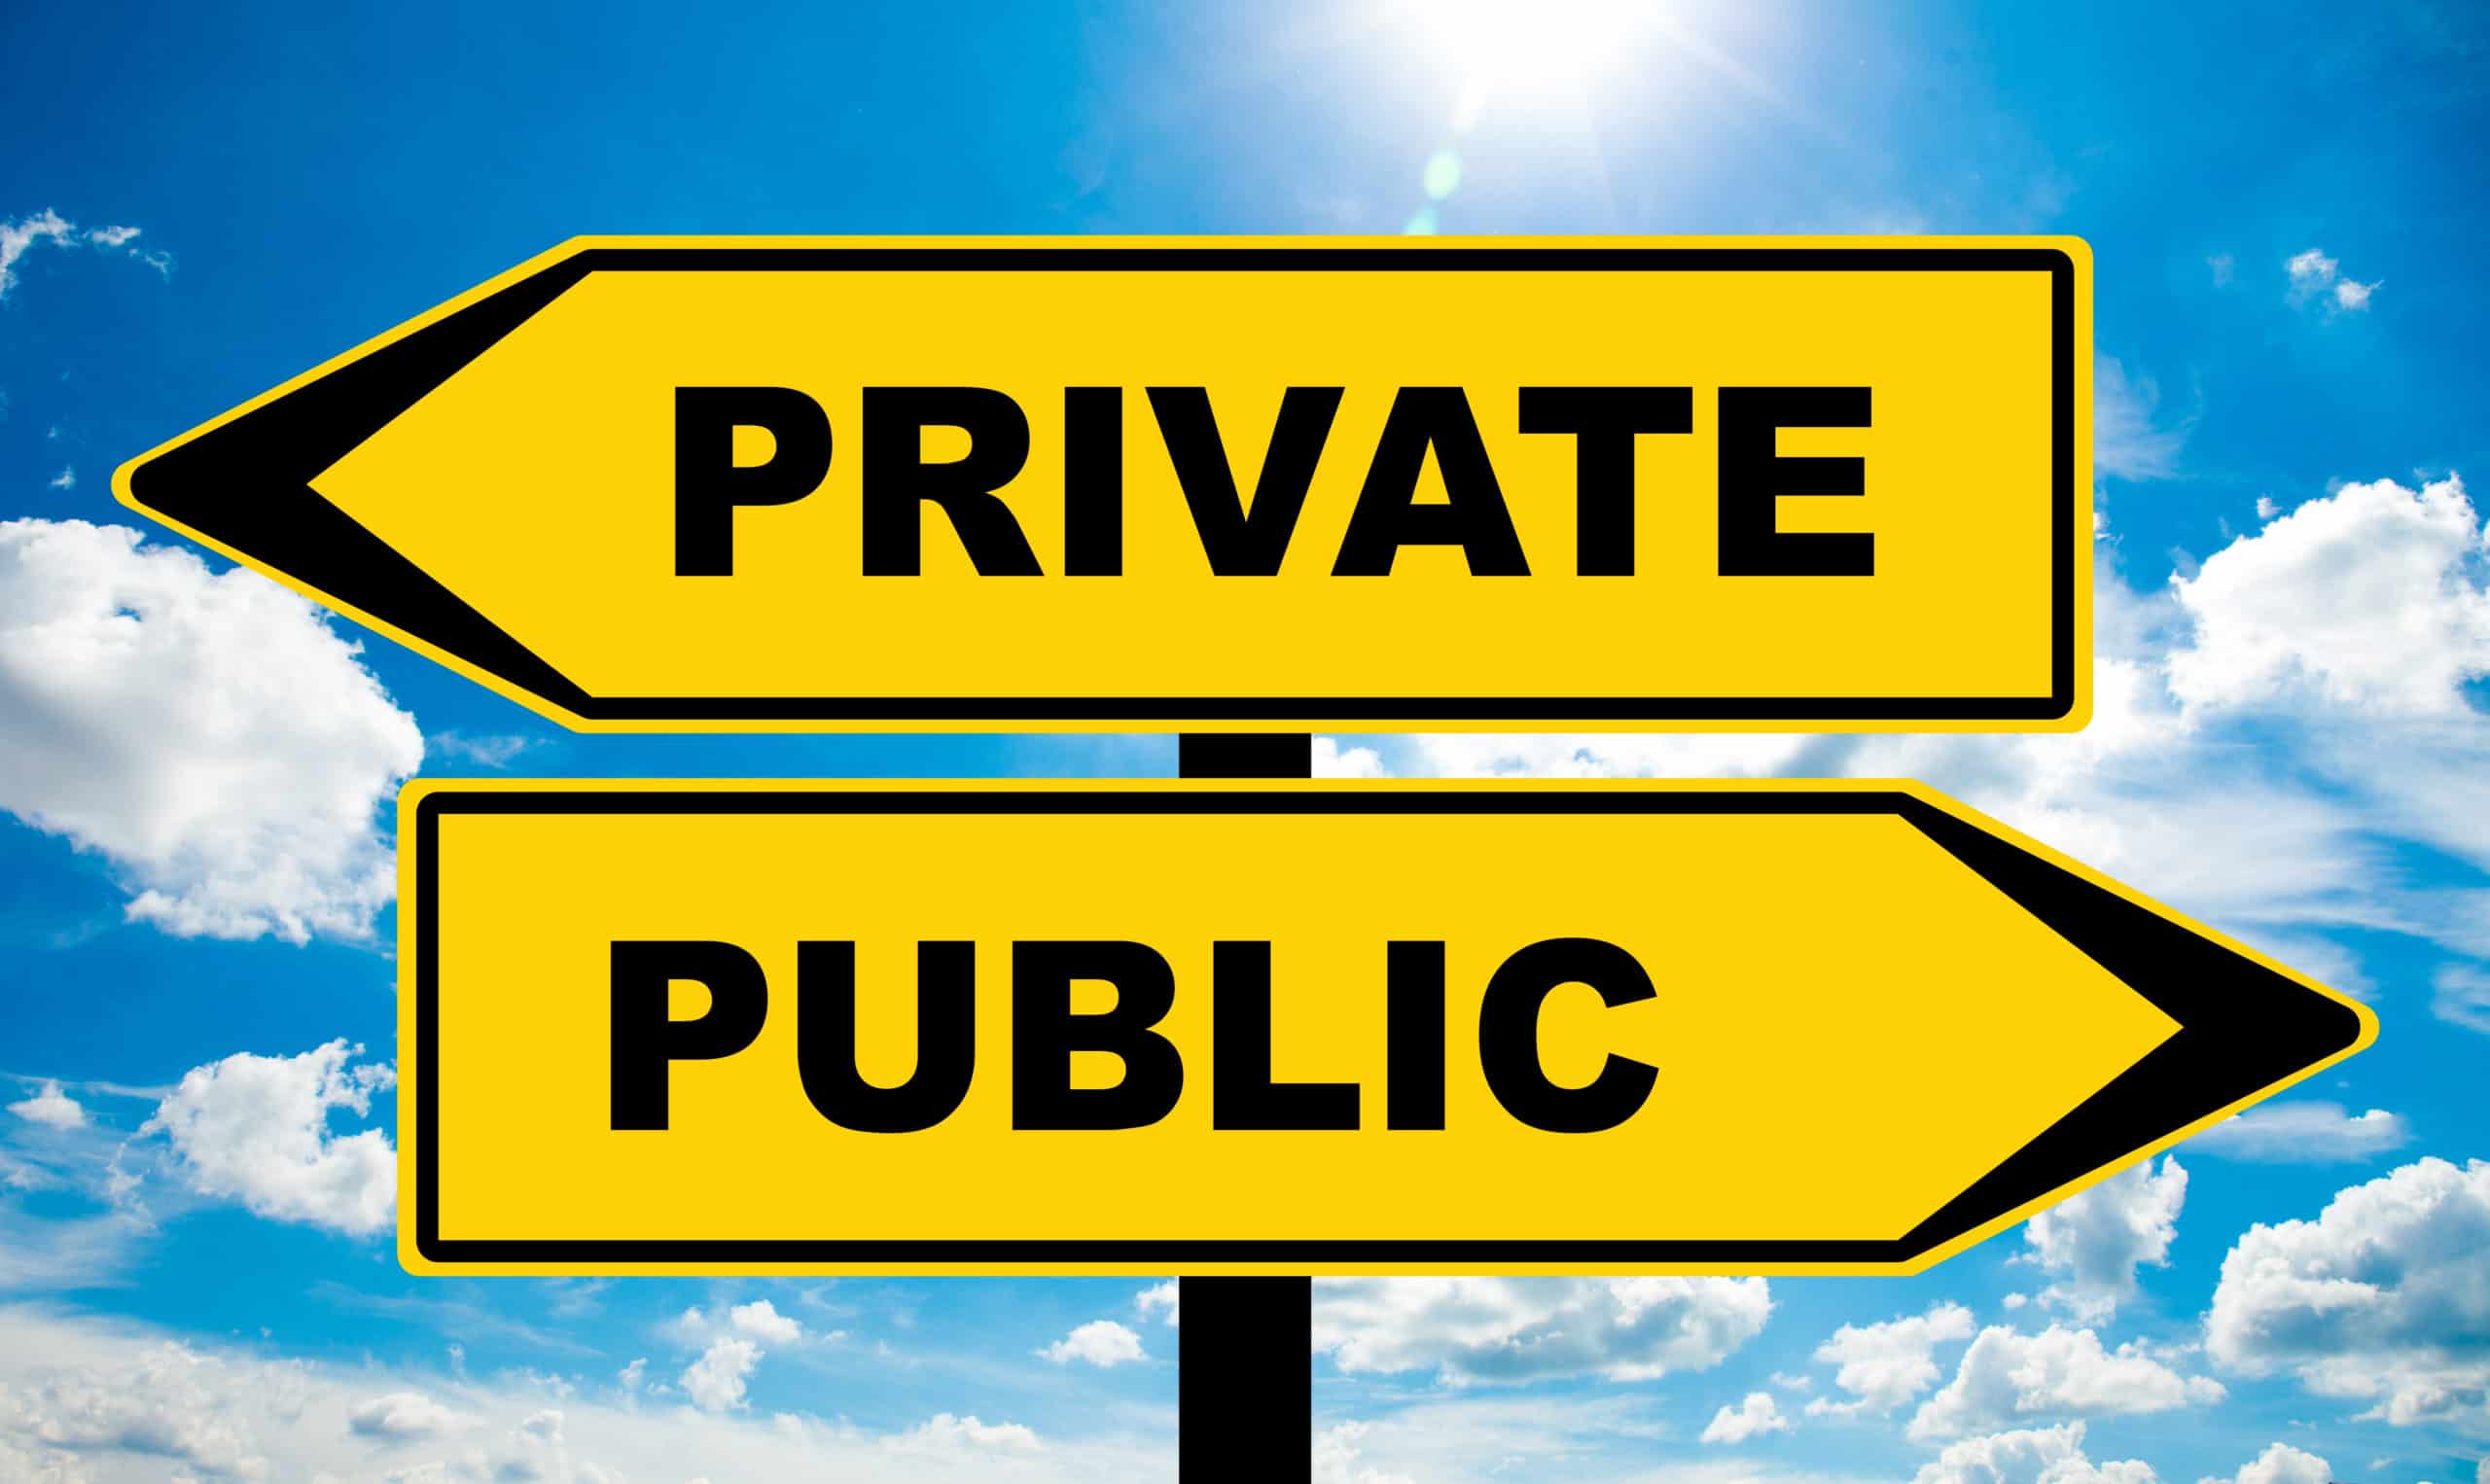 let's distinguish between public and private matters